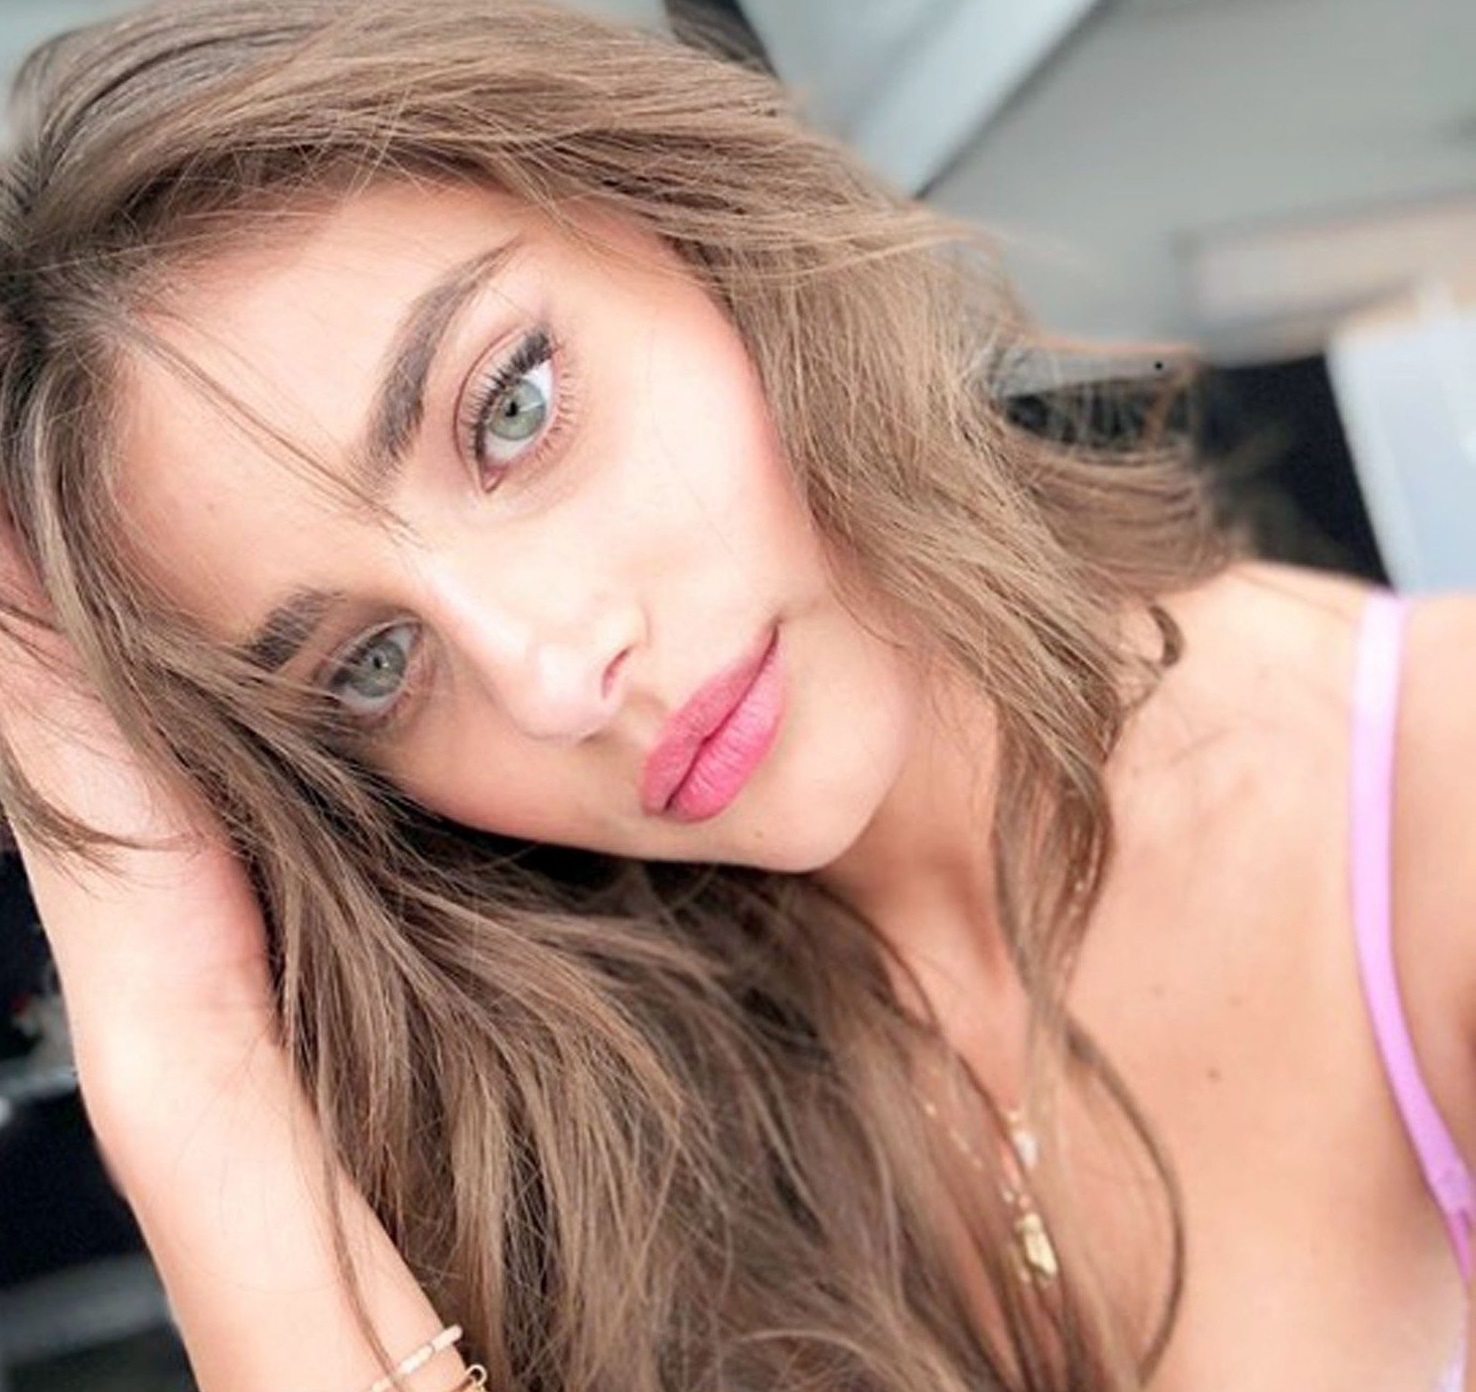 BGUK_1199838 - VARIOUS, UNITED KINGDOM - MODEL TAYLOR HILL PICTURED IN THIS CELEBRITY SOCIAL MEDIA PHOTO. *BACKGRID DOES NOT CLAIM ANY COPYRIGHT OR LICENSE IN THE ATTACHED MATERIAL. ANY DOWNLOADING FEES CHARGED BY BACKGRID ARE FOR BACKGRID'S SERVICES ONLY, AND DO NOT, NOR ARE THEY INTENDED TO, CONVEY TO THE USER ANY COPYRIGHT OR LICENSE IN THE MATERIAL. BY PUBLISHING THIS MATERIAL , THE USER EXPRESSLY AGREES TO INDEMNIFY AND TO HOLD BACKGRID HARMLESS FROM ANY CLAIMS, DEMANDS, OR CAUSES OF ACTION ARISING OUT OF OR CONNECTED IN ANY WAY WITH USER'S PUBLICATION OF THE MATERIAL* Pictured: TAYLOR HILL BACKGRID UK 10 APRIL 2018, Image: 368242092, License: Rights-managed, Restrictions: , Model Release: no, Credit line: Profimedia, Xposurephotos